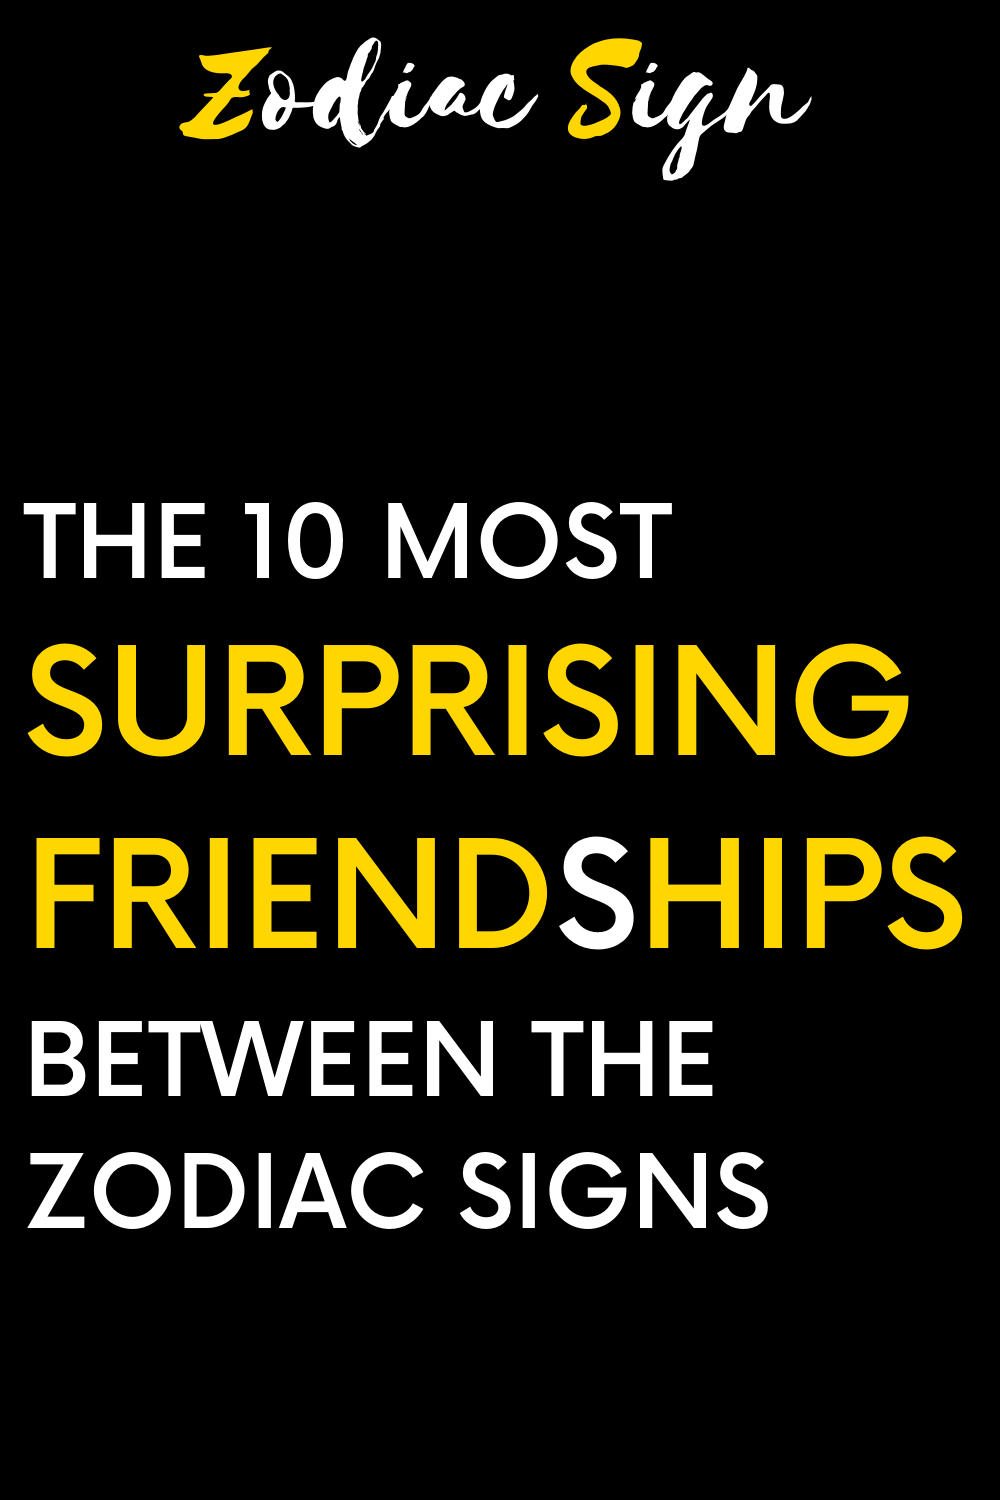 The 10 most surprising friendships between the zodiac signs